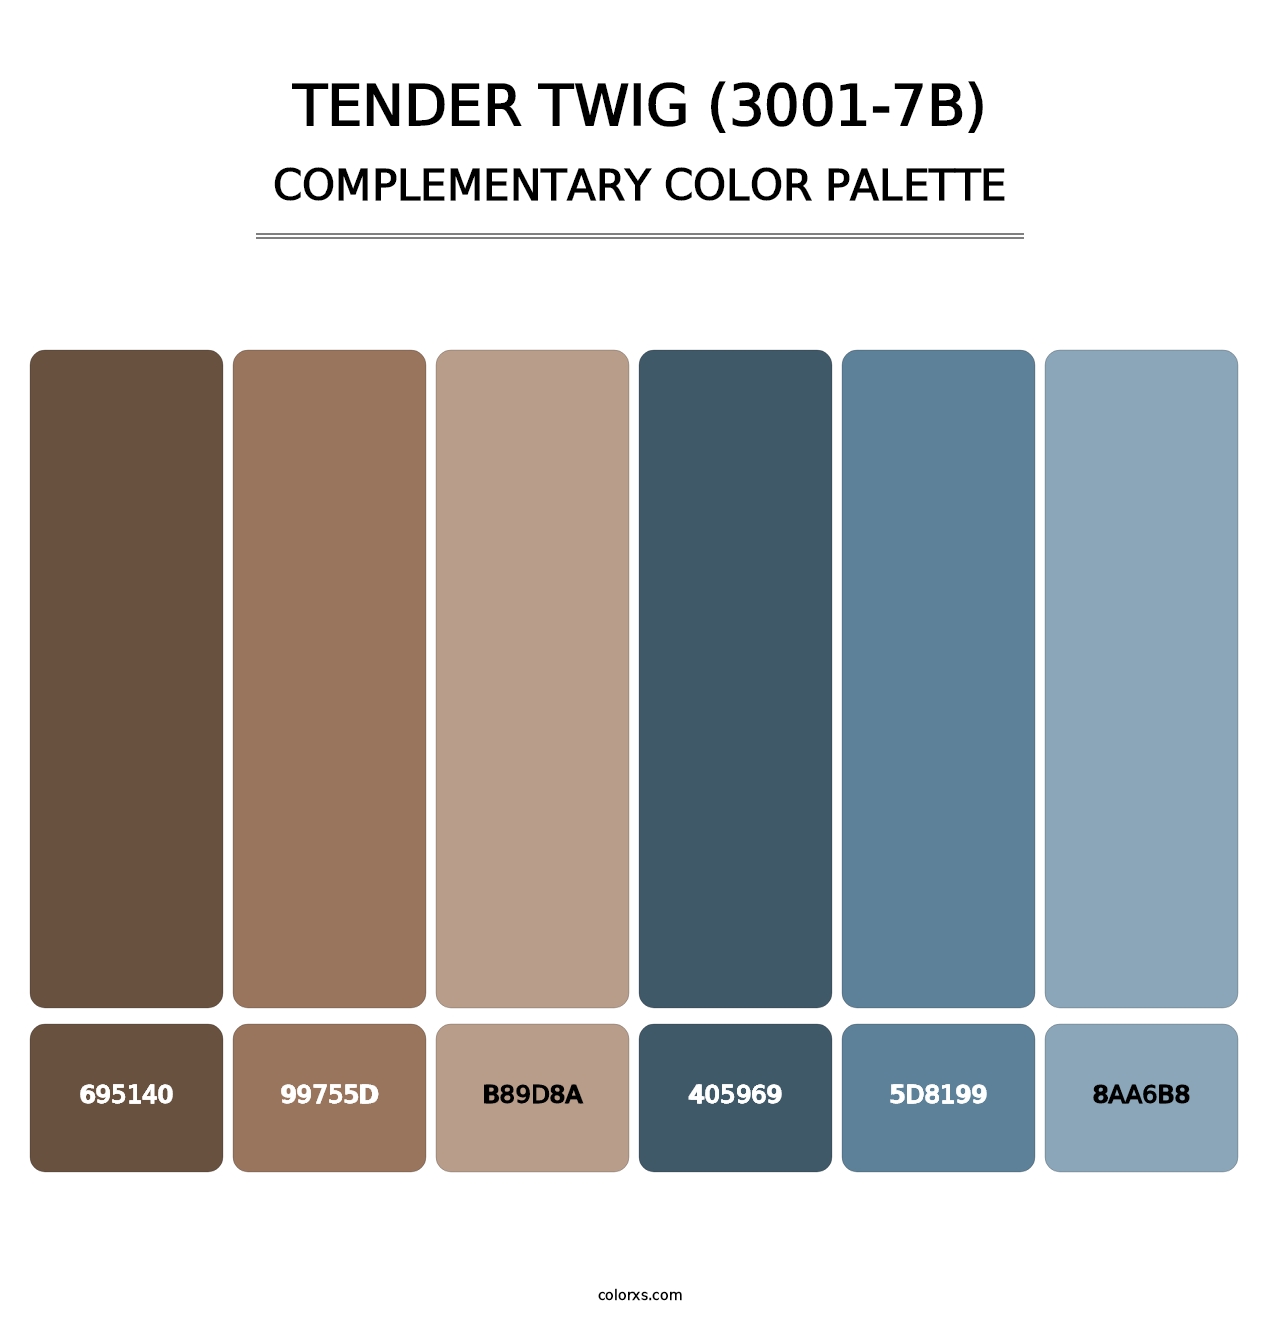 Tender Twig (3001-7B) - Complementary Color Palette